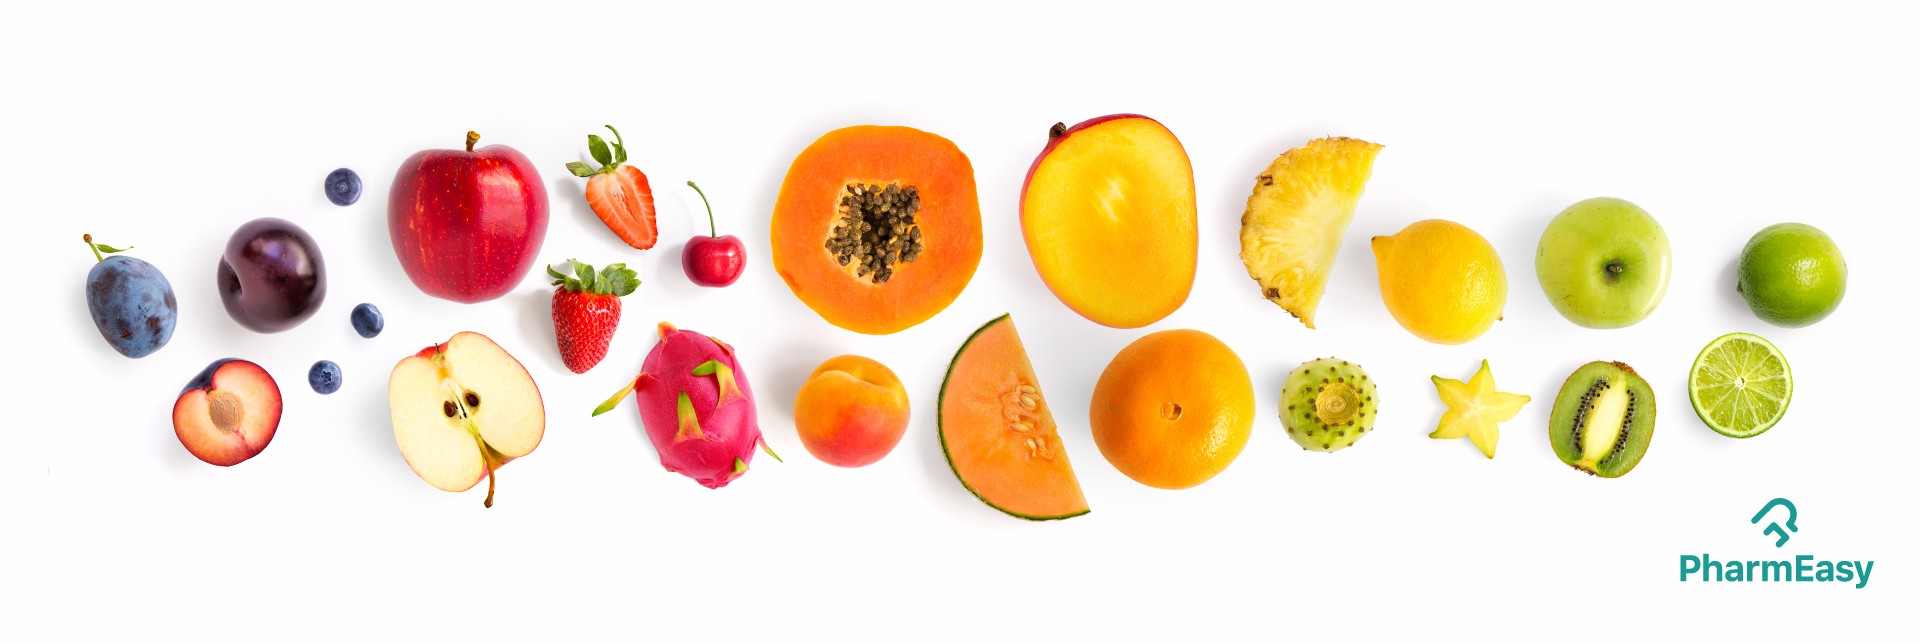 parti Sophie egoisme Vitamin A-Rich Fruits That You Should Include In Your Diet - PharmEasy Blog